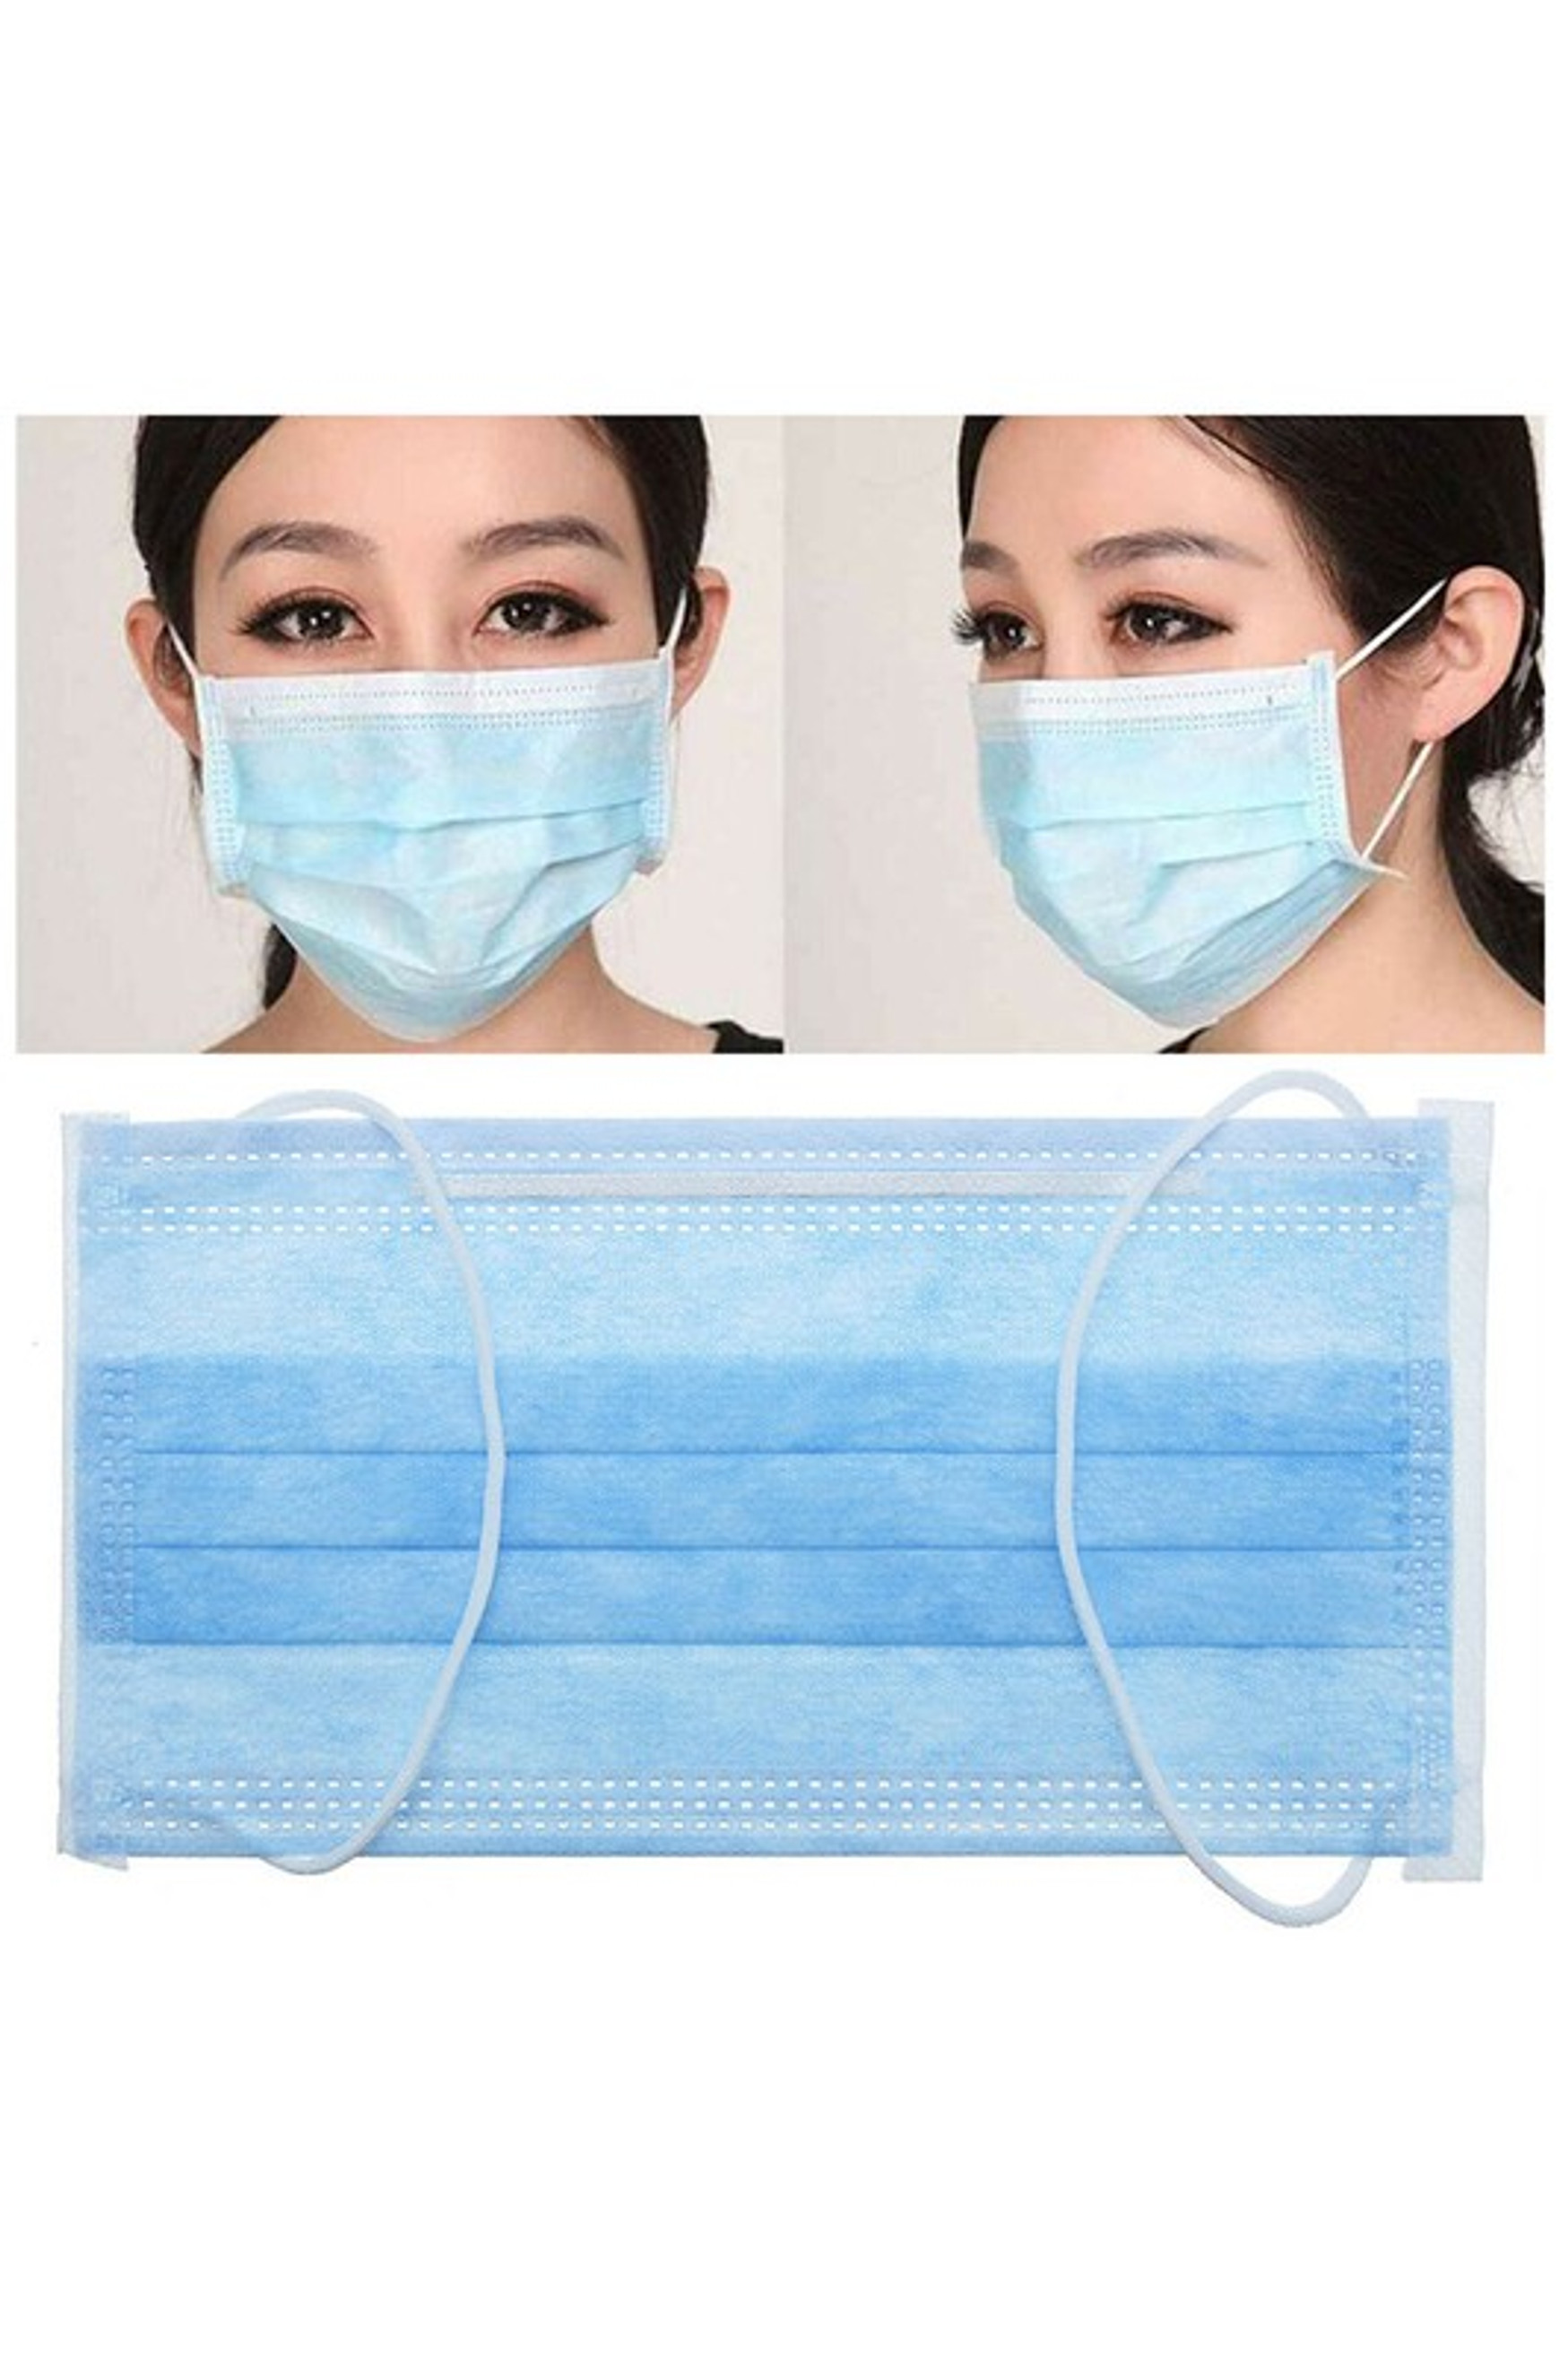 25 x 2-Packs (50) - Single Use Disposable Face Masks - Wrapped in Packs of 2